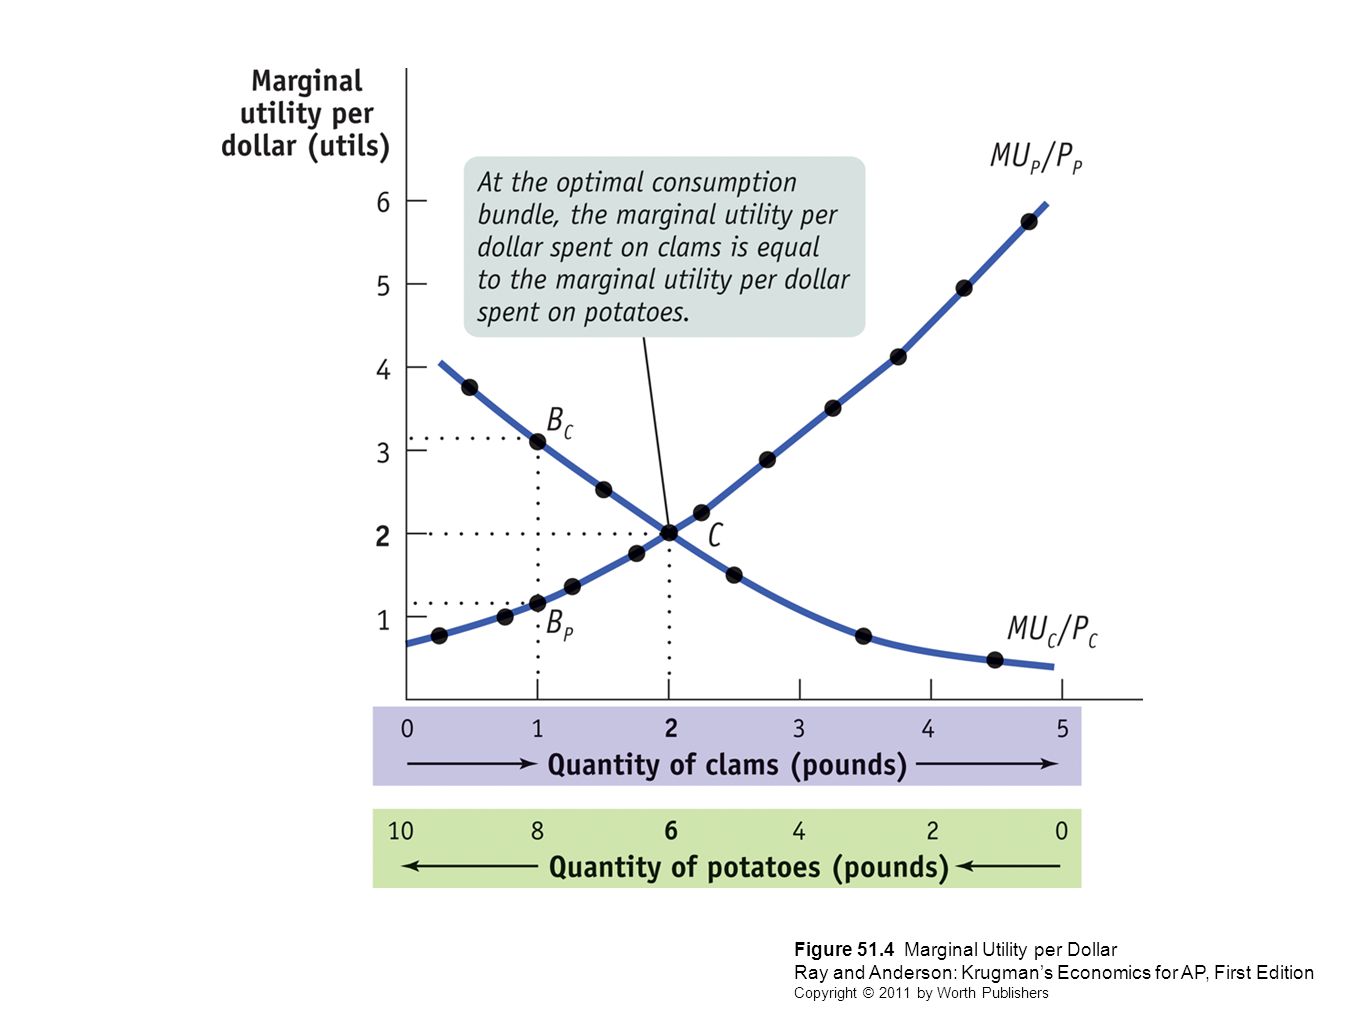 Figure 51.4 Marginal Utility per Dollar Ray and Anderson: Krugman’s Economics for AP, First Edition Copyright © 2011 by Worth Publishers